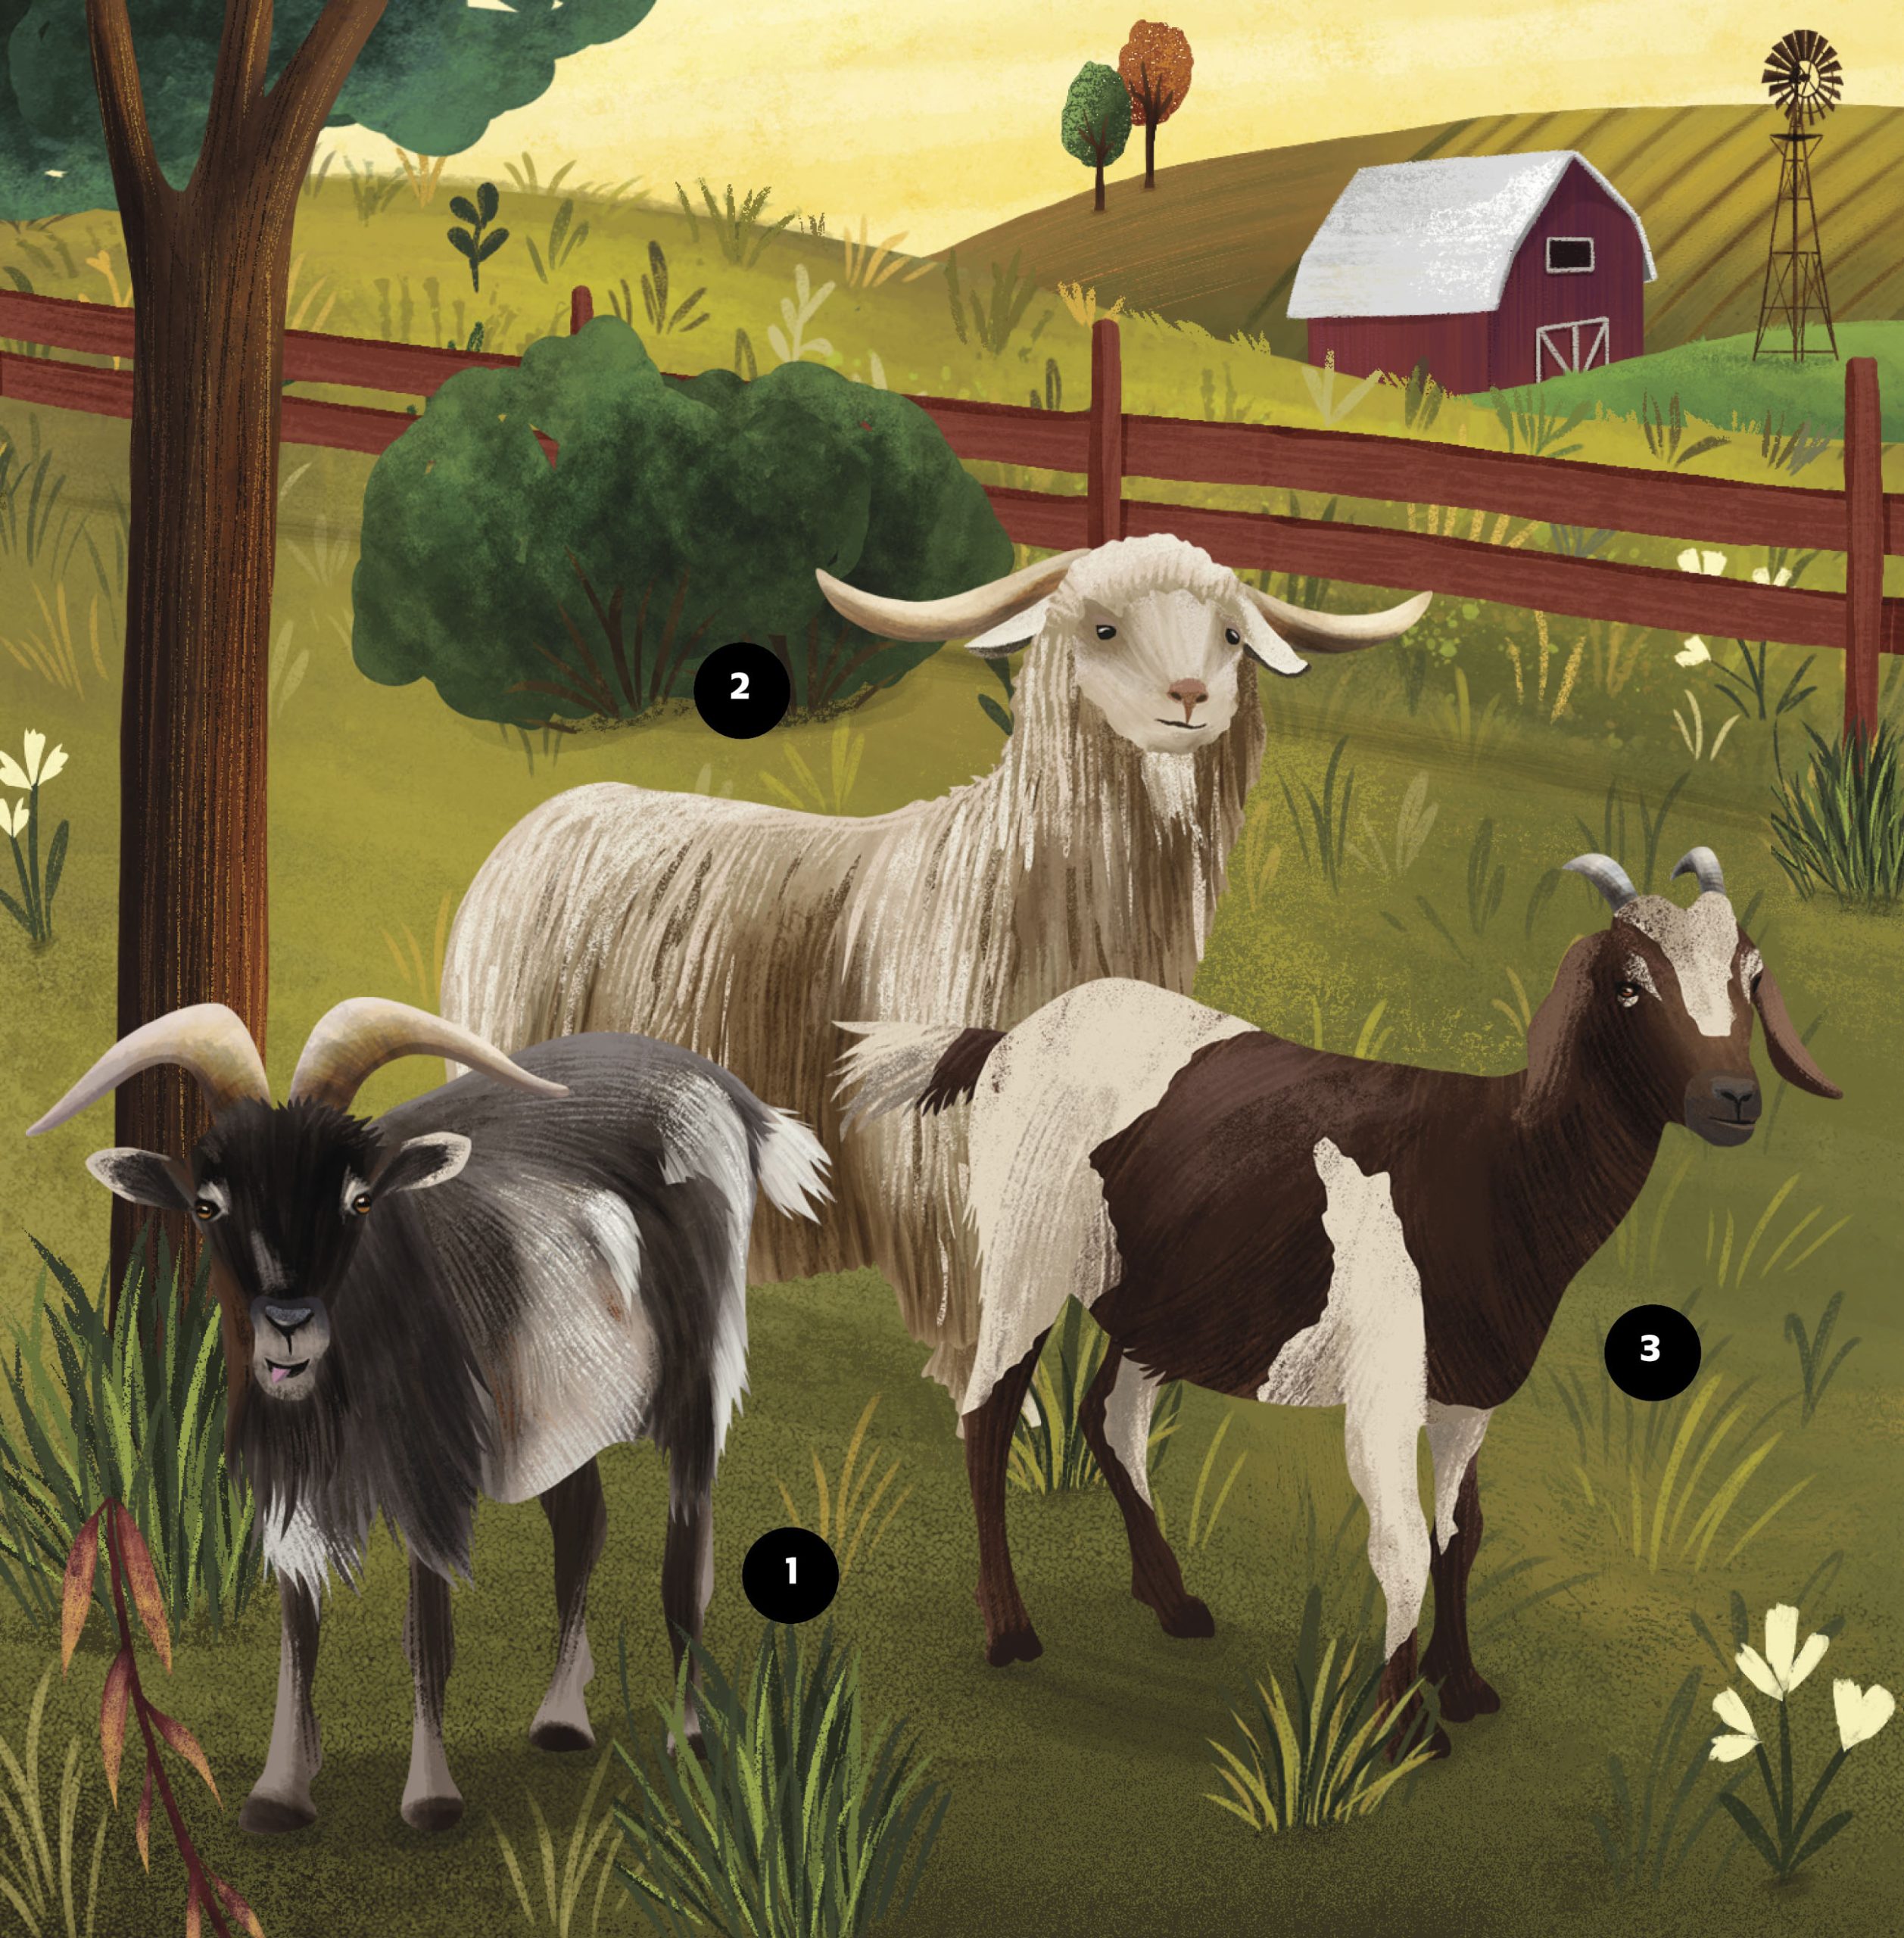 An illustration of three types of goats in a pasture